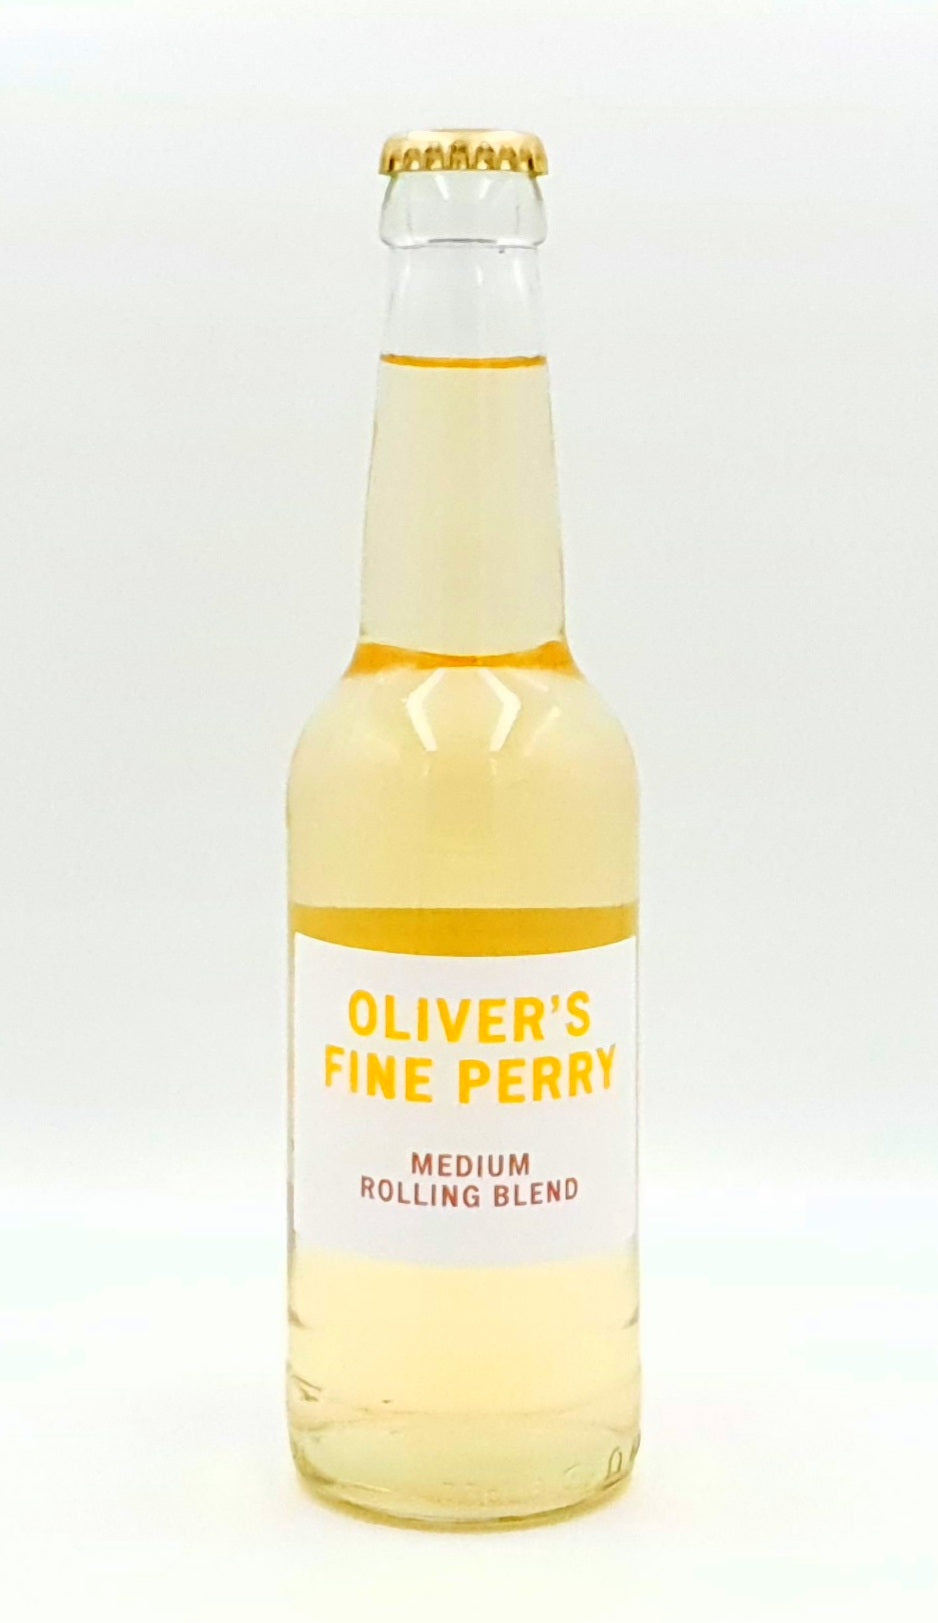 Fine Perry Rolling Blend Medium - Oliver's - Medium Perry, 6%, 330ml Bottle